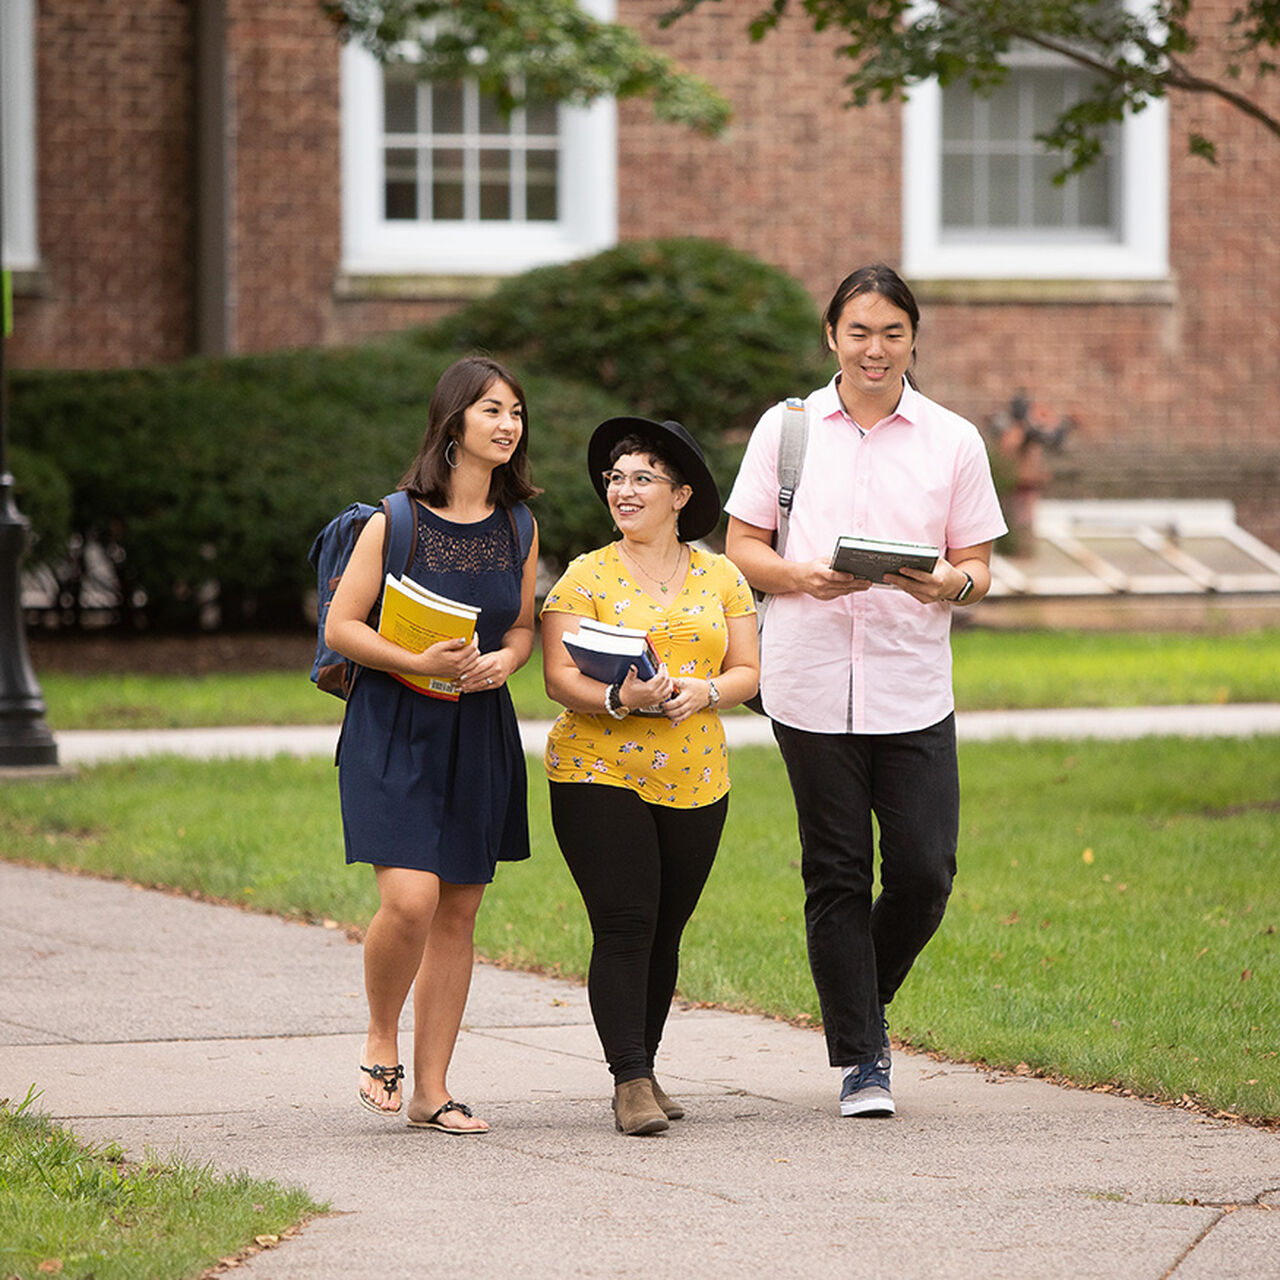 Three students carrying books walking down an outdoor path on campus image number 0